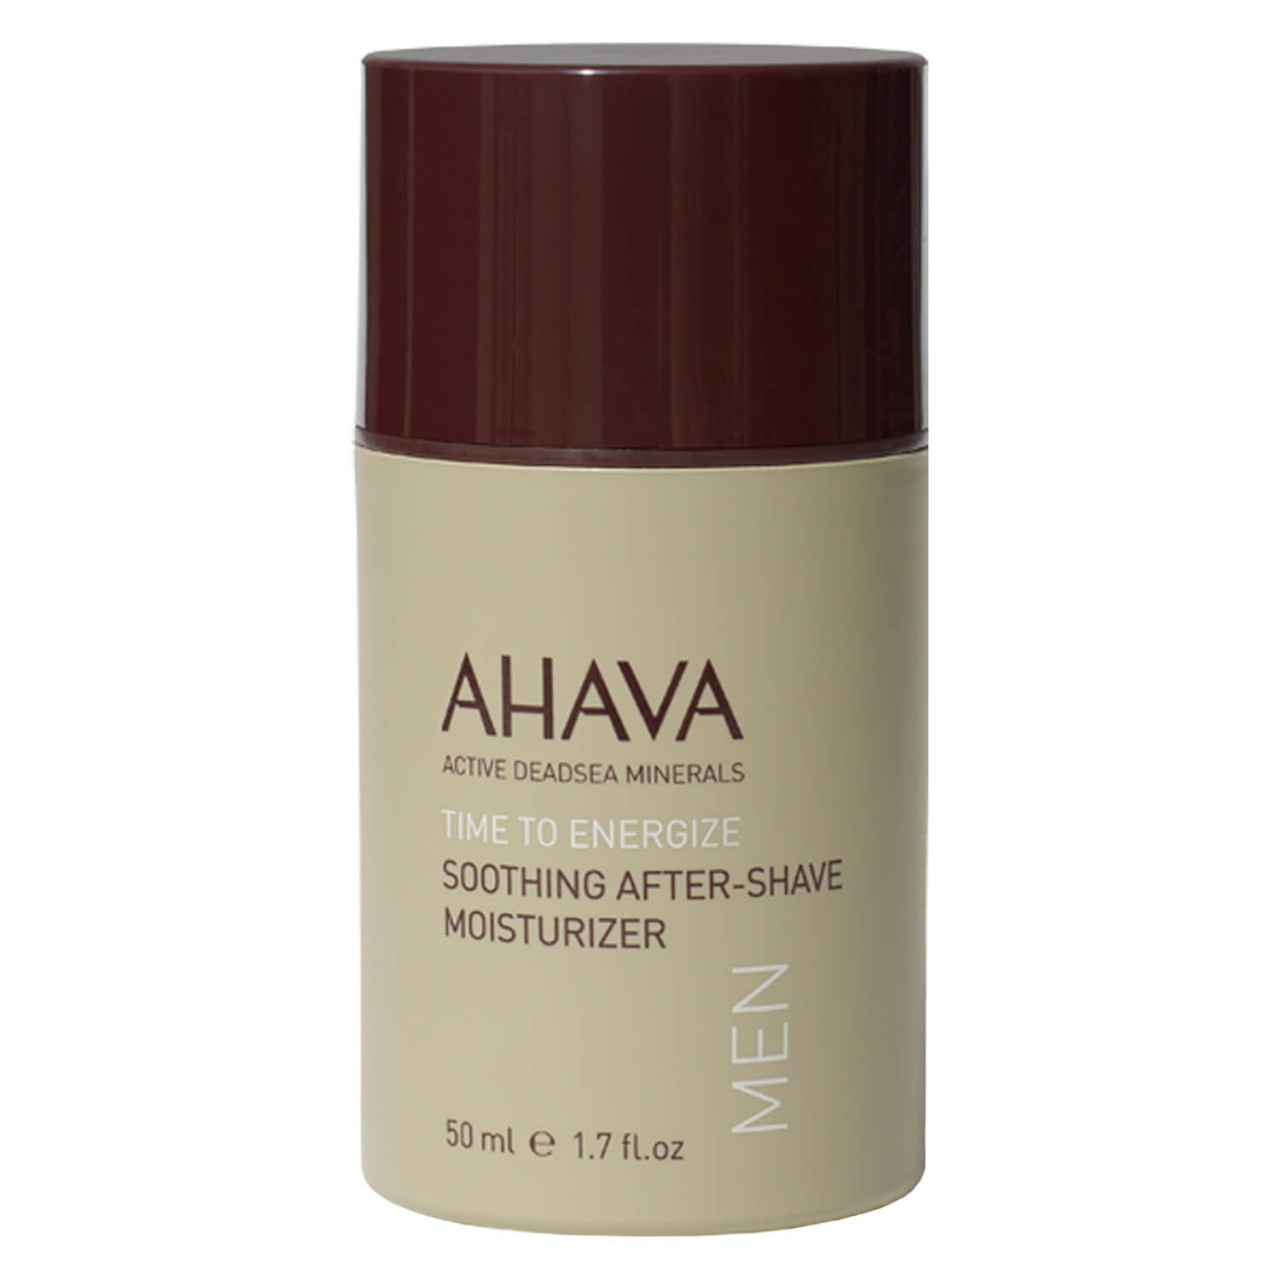 Time To Energize - Soothing AfterShave Moisturizer von Ahava